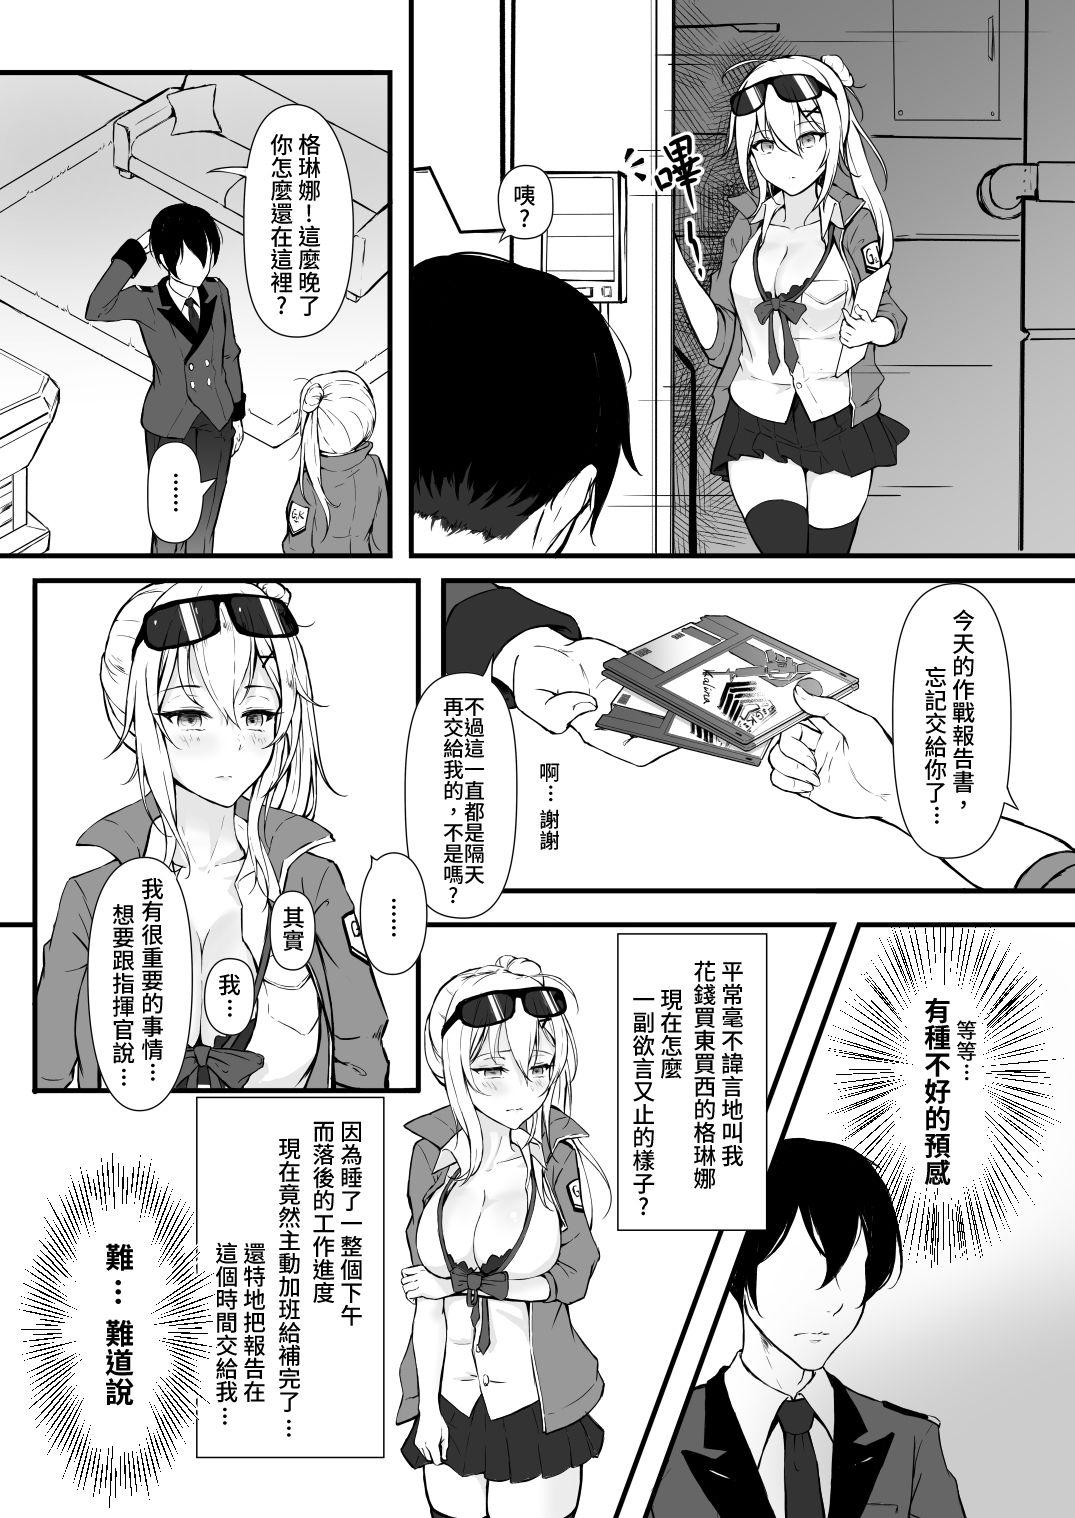 Behind How Many Diamonds a Kiss Worth? - Girls frontline Gay Theresome - Page 7